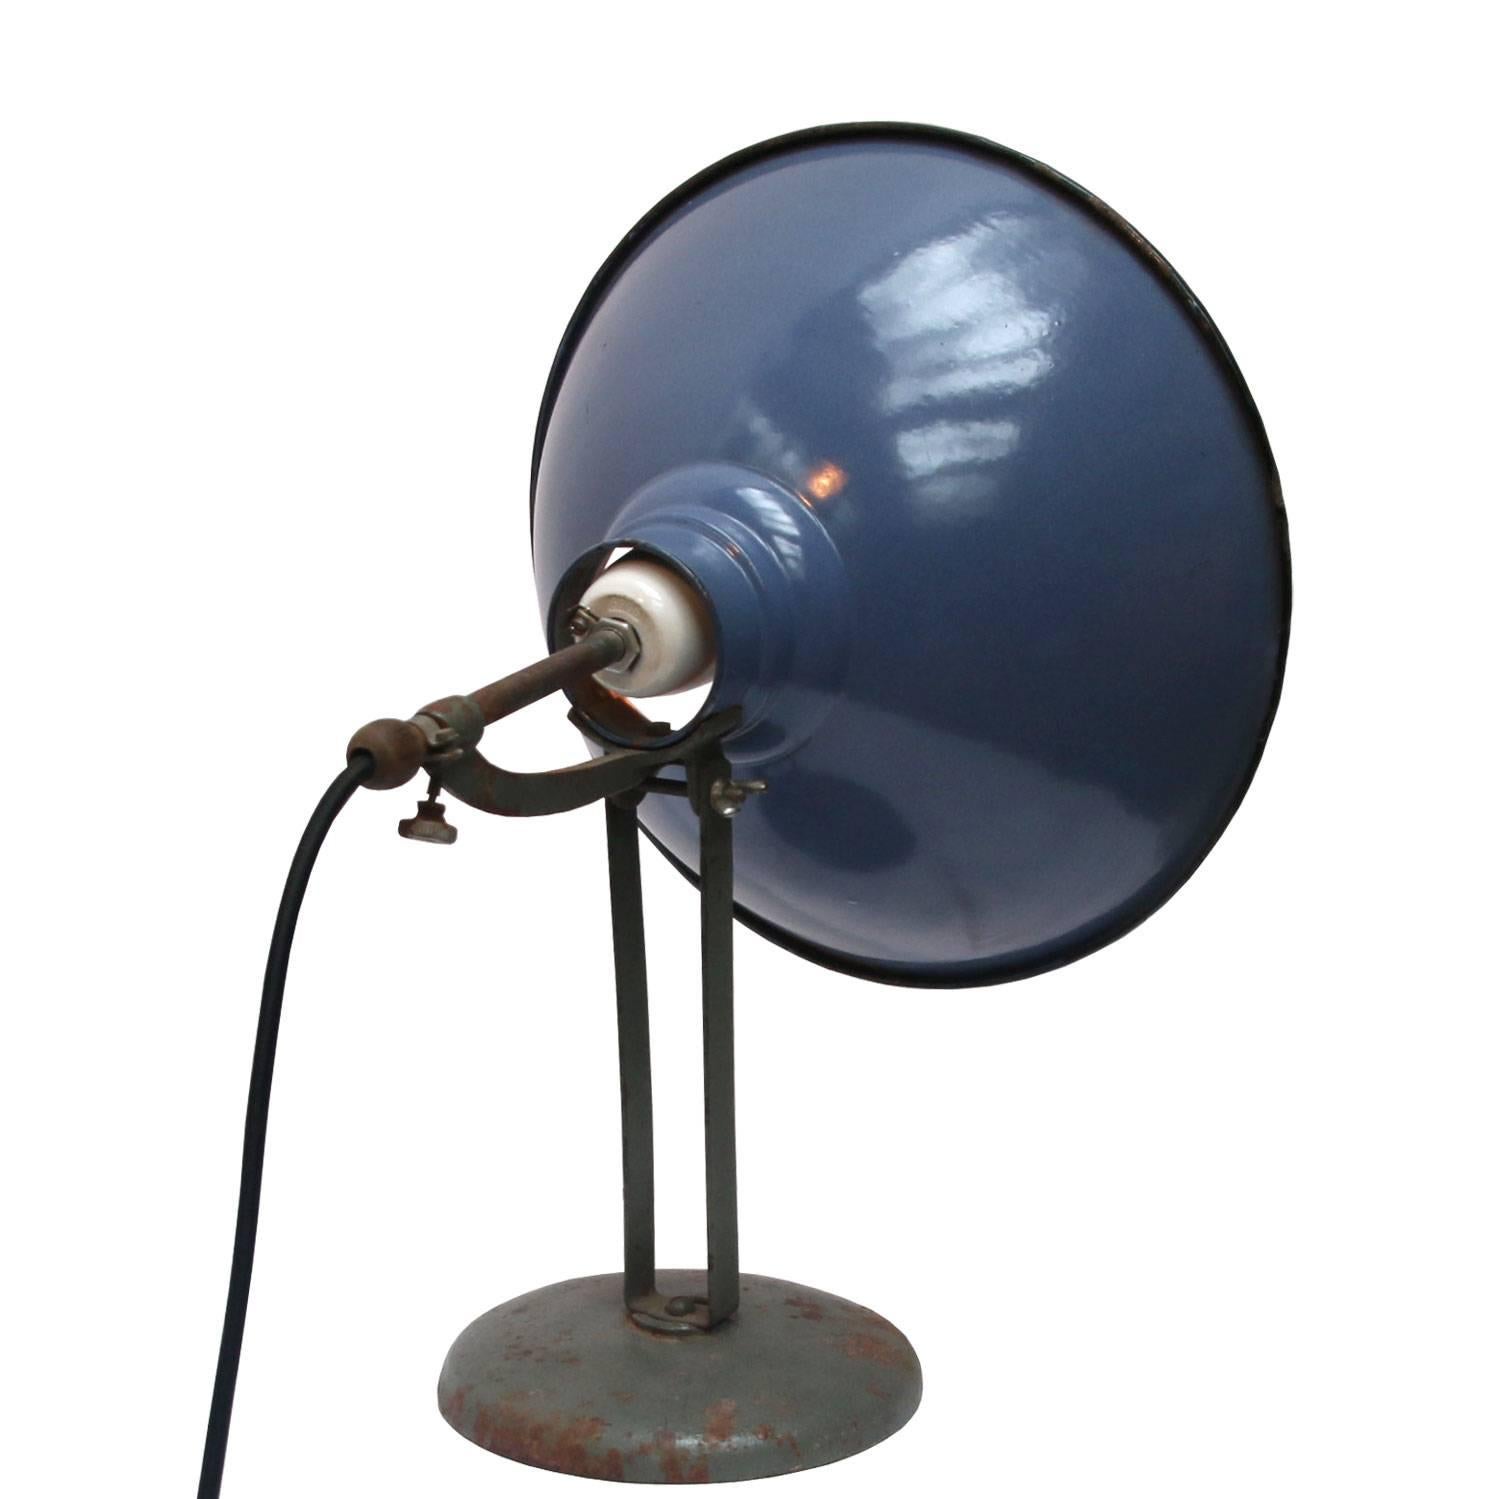 Industrial enamel desk light. Blue enamel desk light
2 meter wire and plug.

All lamps have been made suitable by international standards for incandescent light bulbs, energy-efficient and LED bulbs with an E26/E27 socket, new wiring CE certified